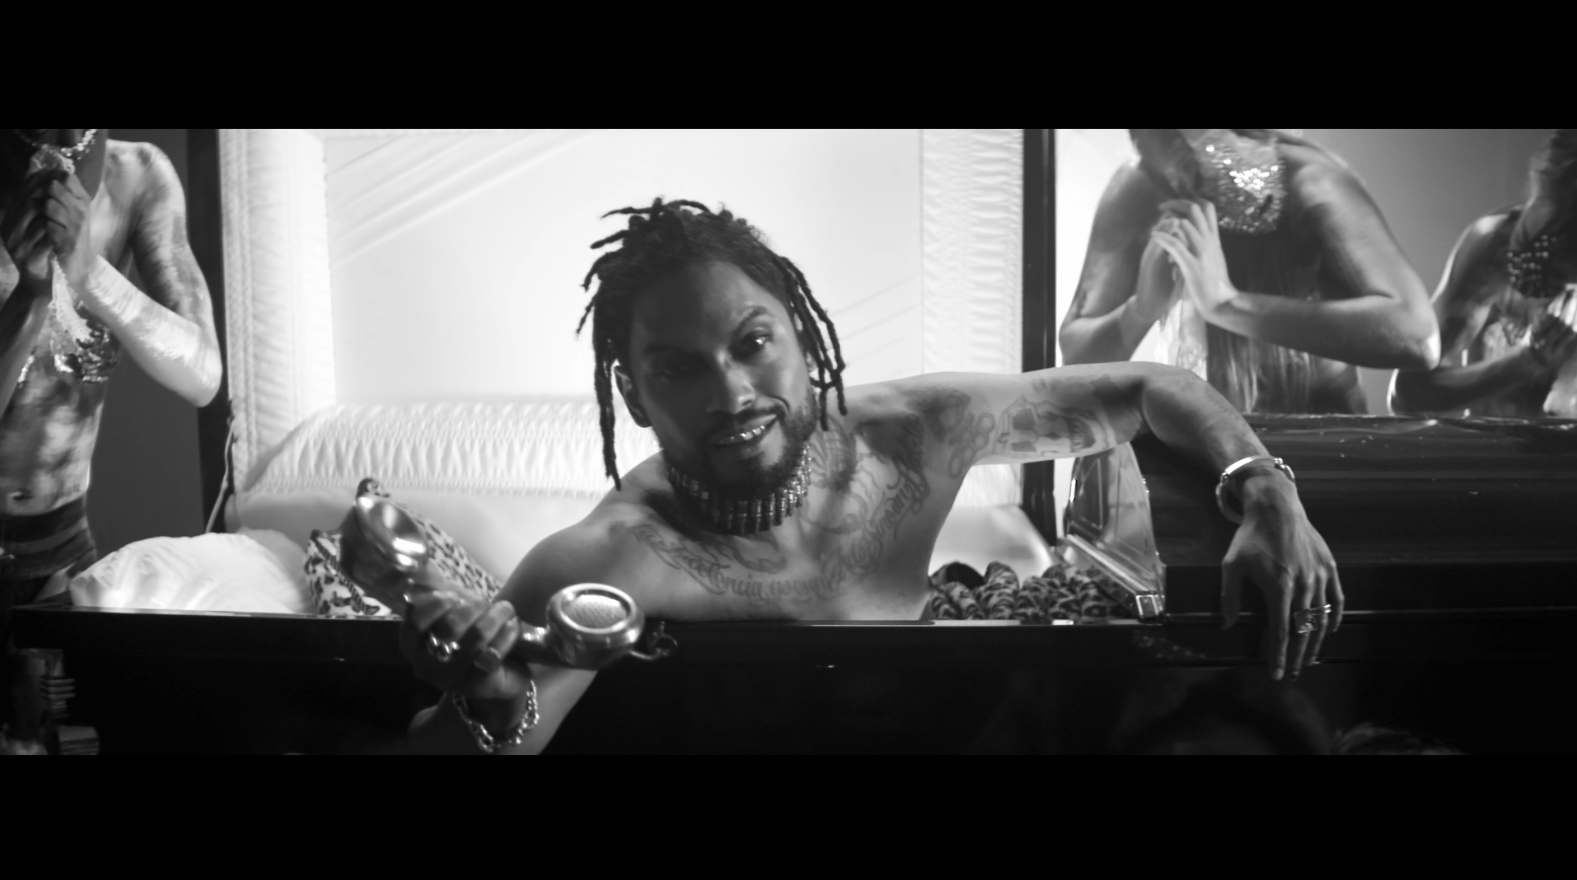 Miguel Releases “Funeral” Video + Announces Return of “Art Dealer Chic” EP Series